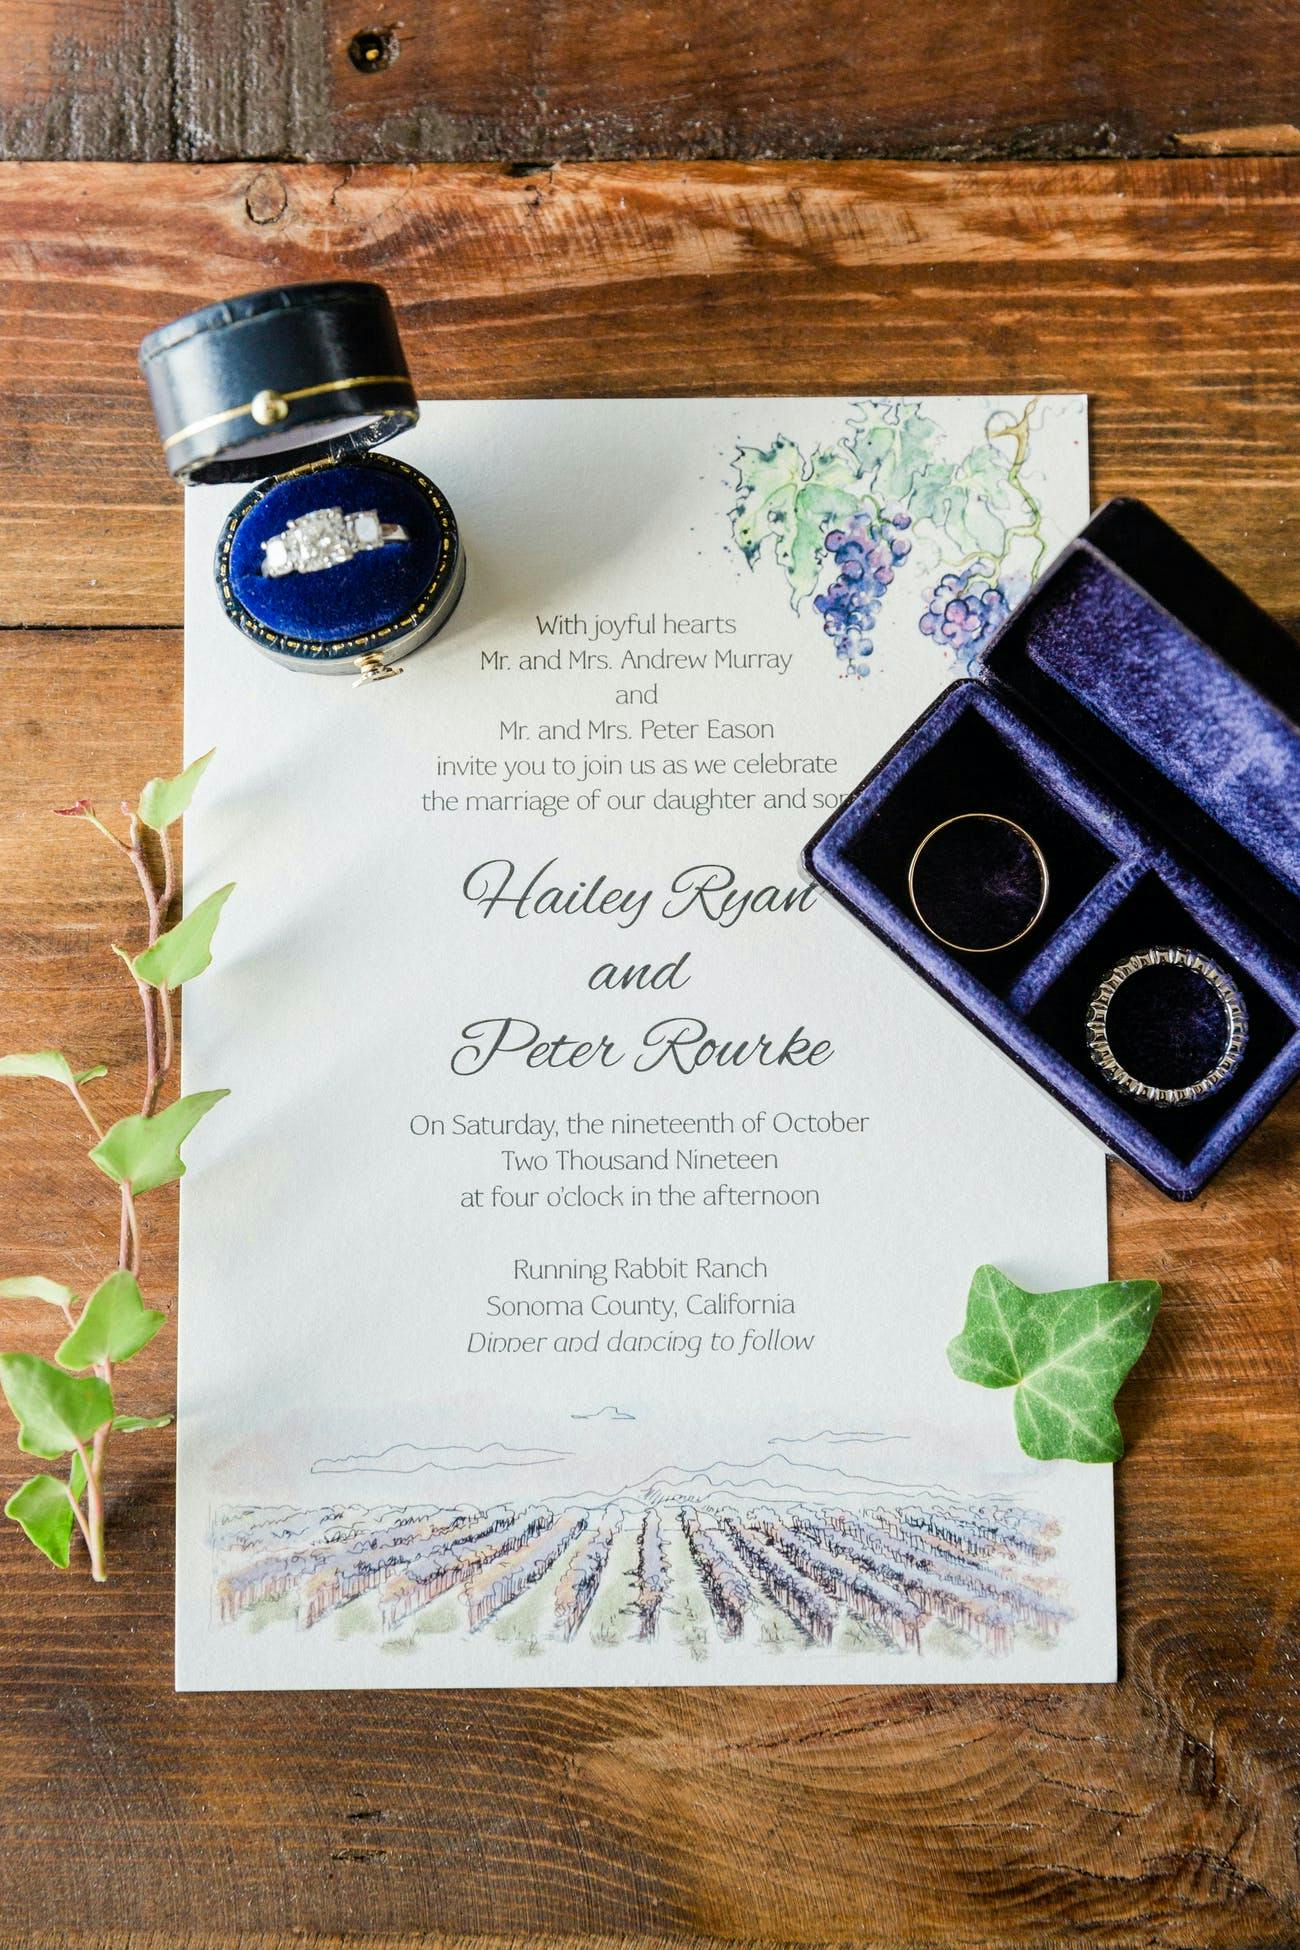 Rustic-chic wedding invitation with vineyards | PartySlate